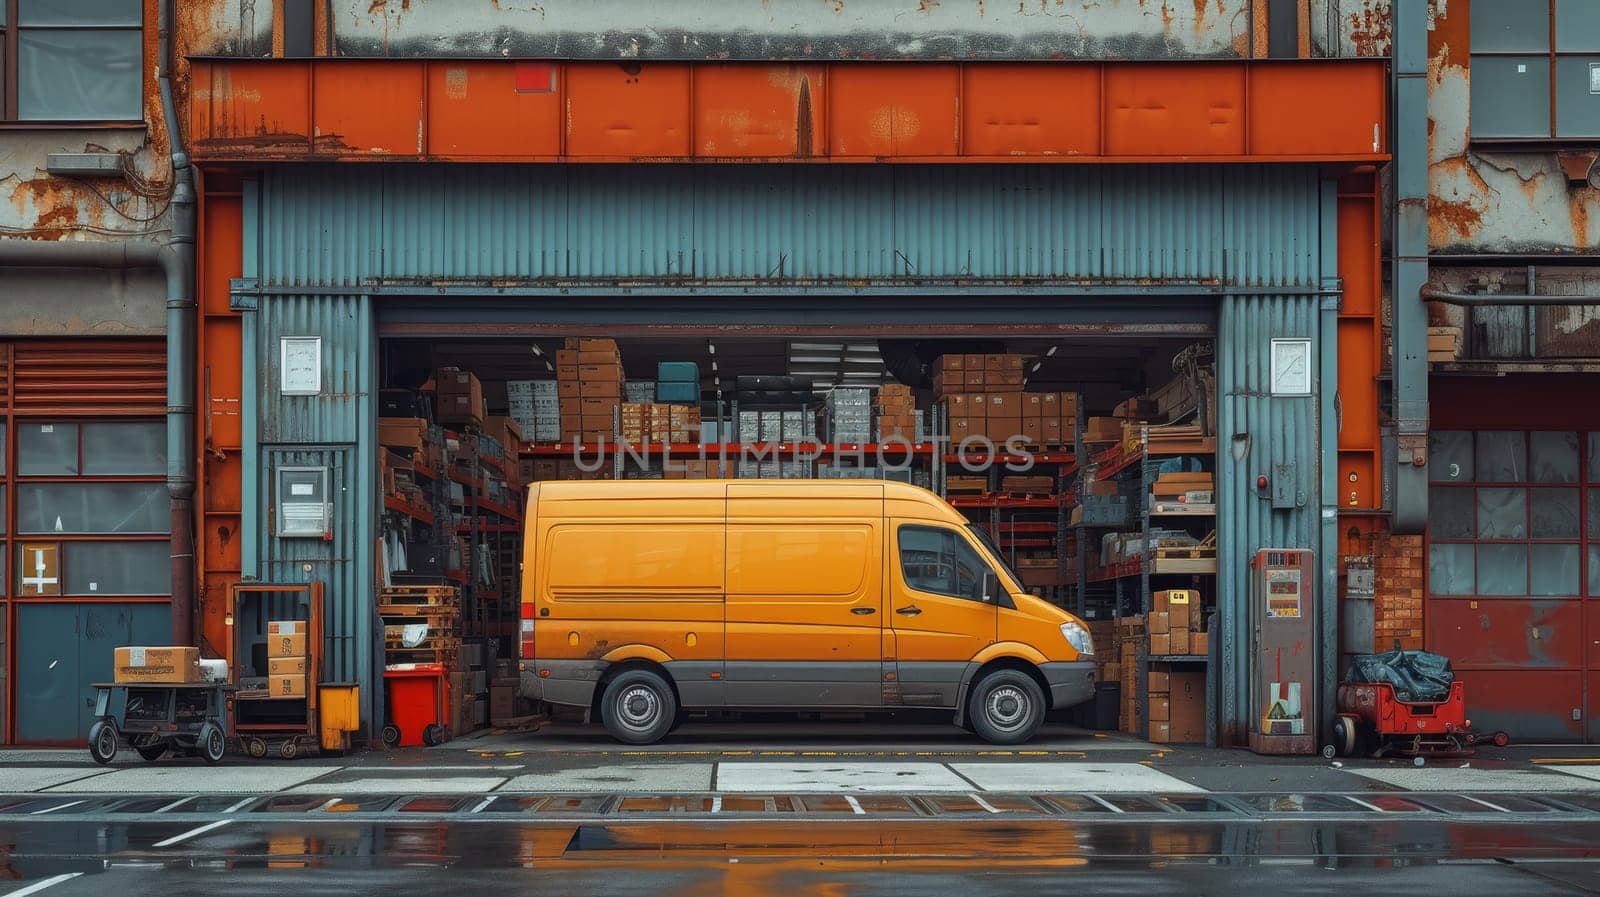 In front of a logistics warehouse with an open door, a delivery van loading cardboard boxes. A truck delivers wholesale merchandise, online orders, e-commerce goods, and purchases.